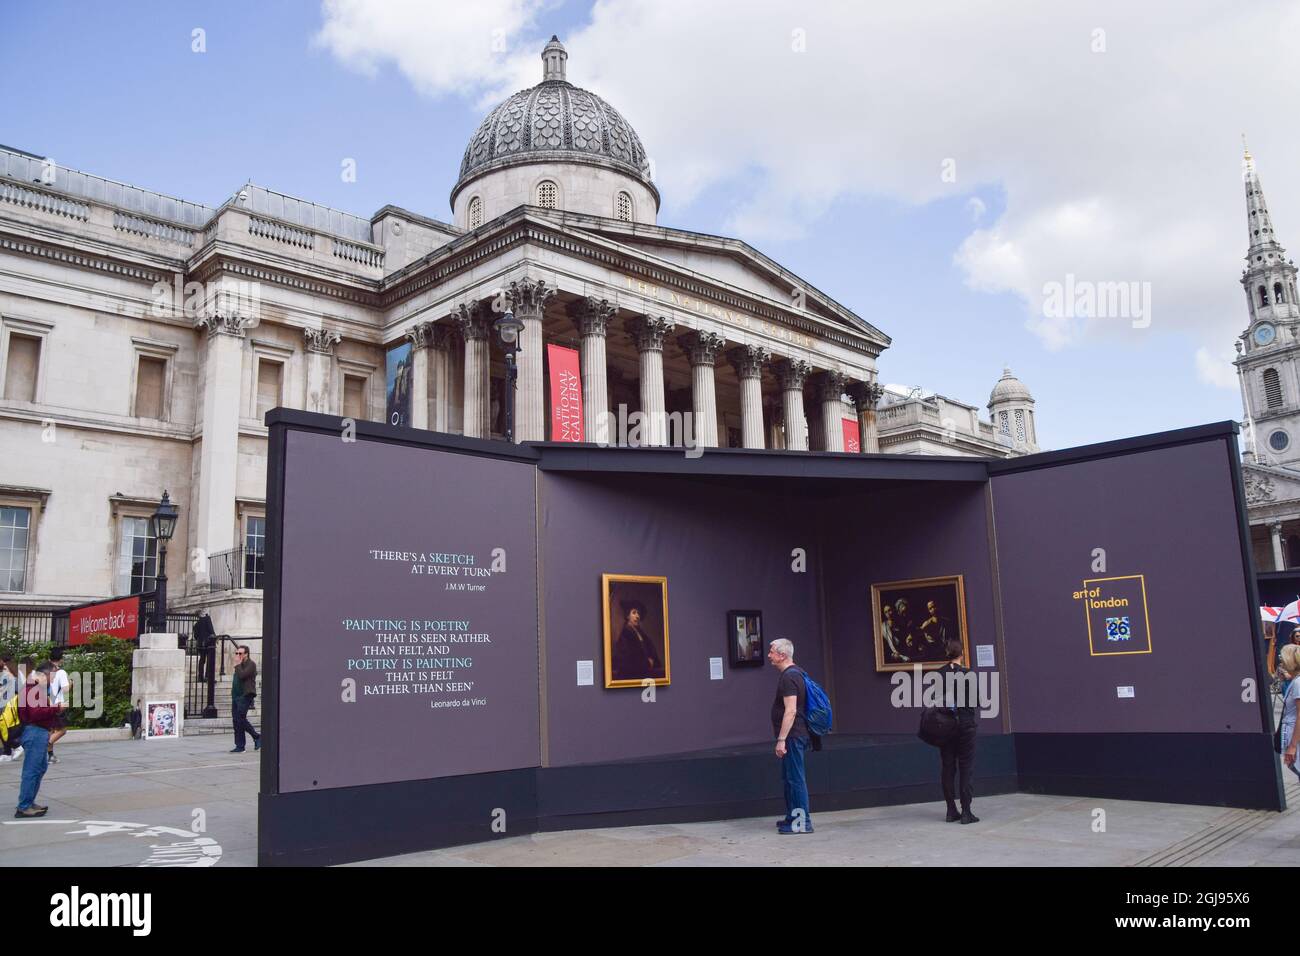 London, United Kingdom. 10th August 2021. The National Gallery's Inside Out Festival, an outdoor exhibition of life-sized replicas of 'the nation's favourite paintings', takes place 10 August - 2 September at Trafalgar Square. Stock Photo